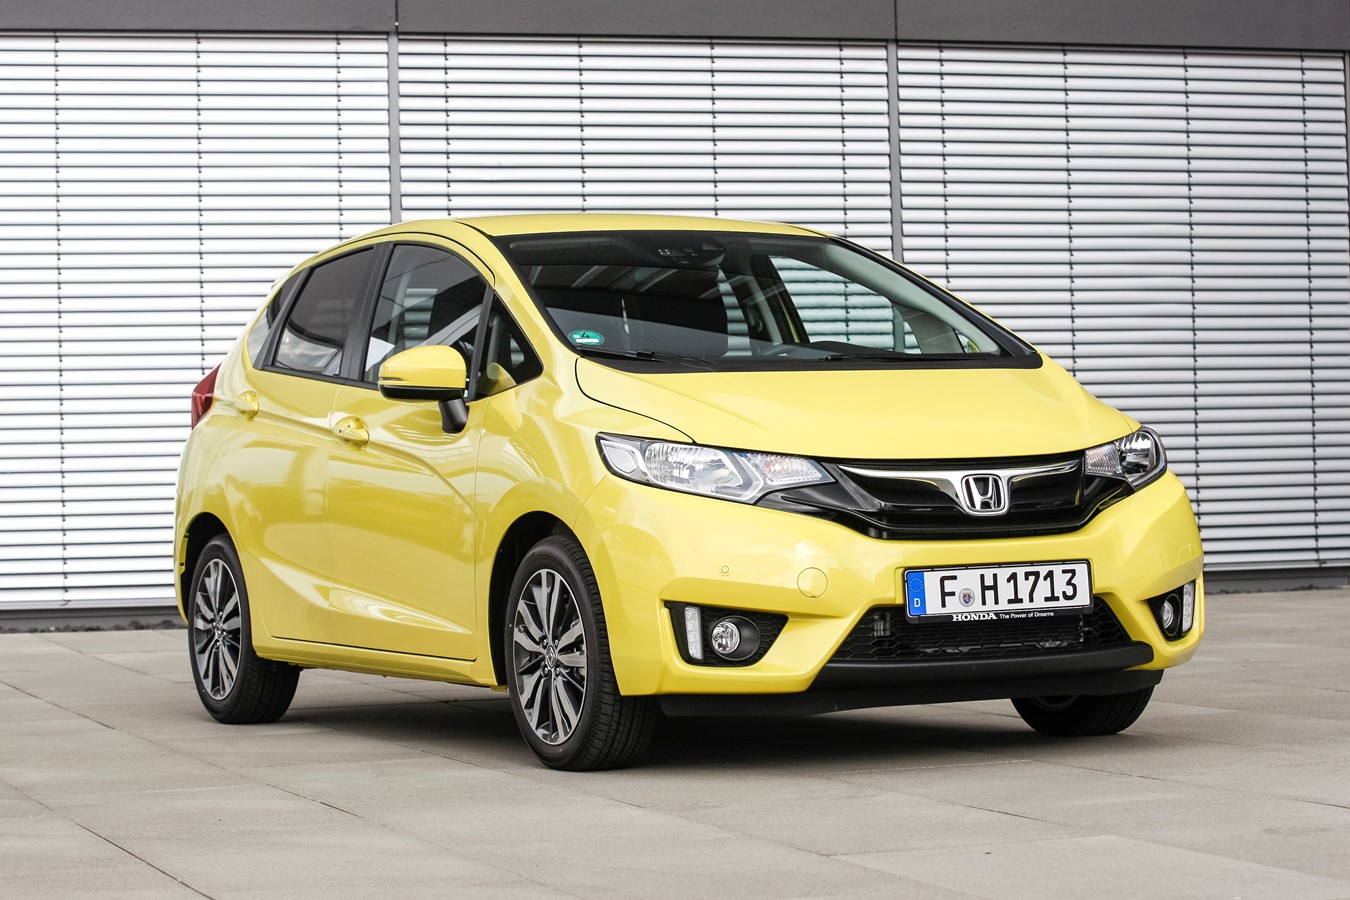 The New Honda Jazz Awarded Best in Class Supermini 2015 by Euro NCAP